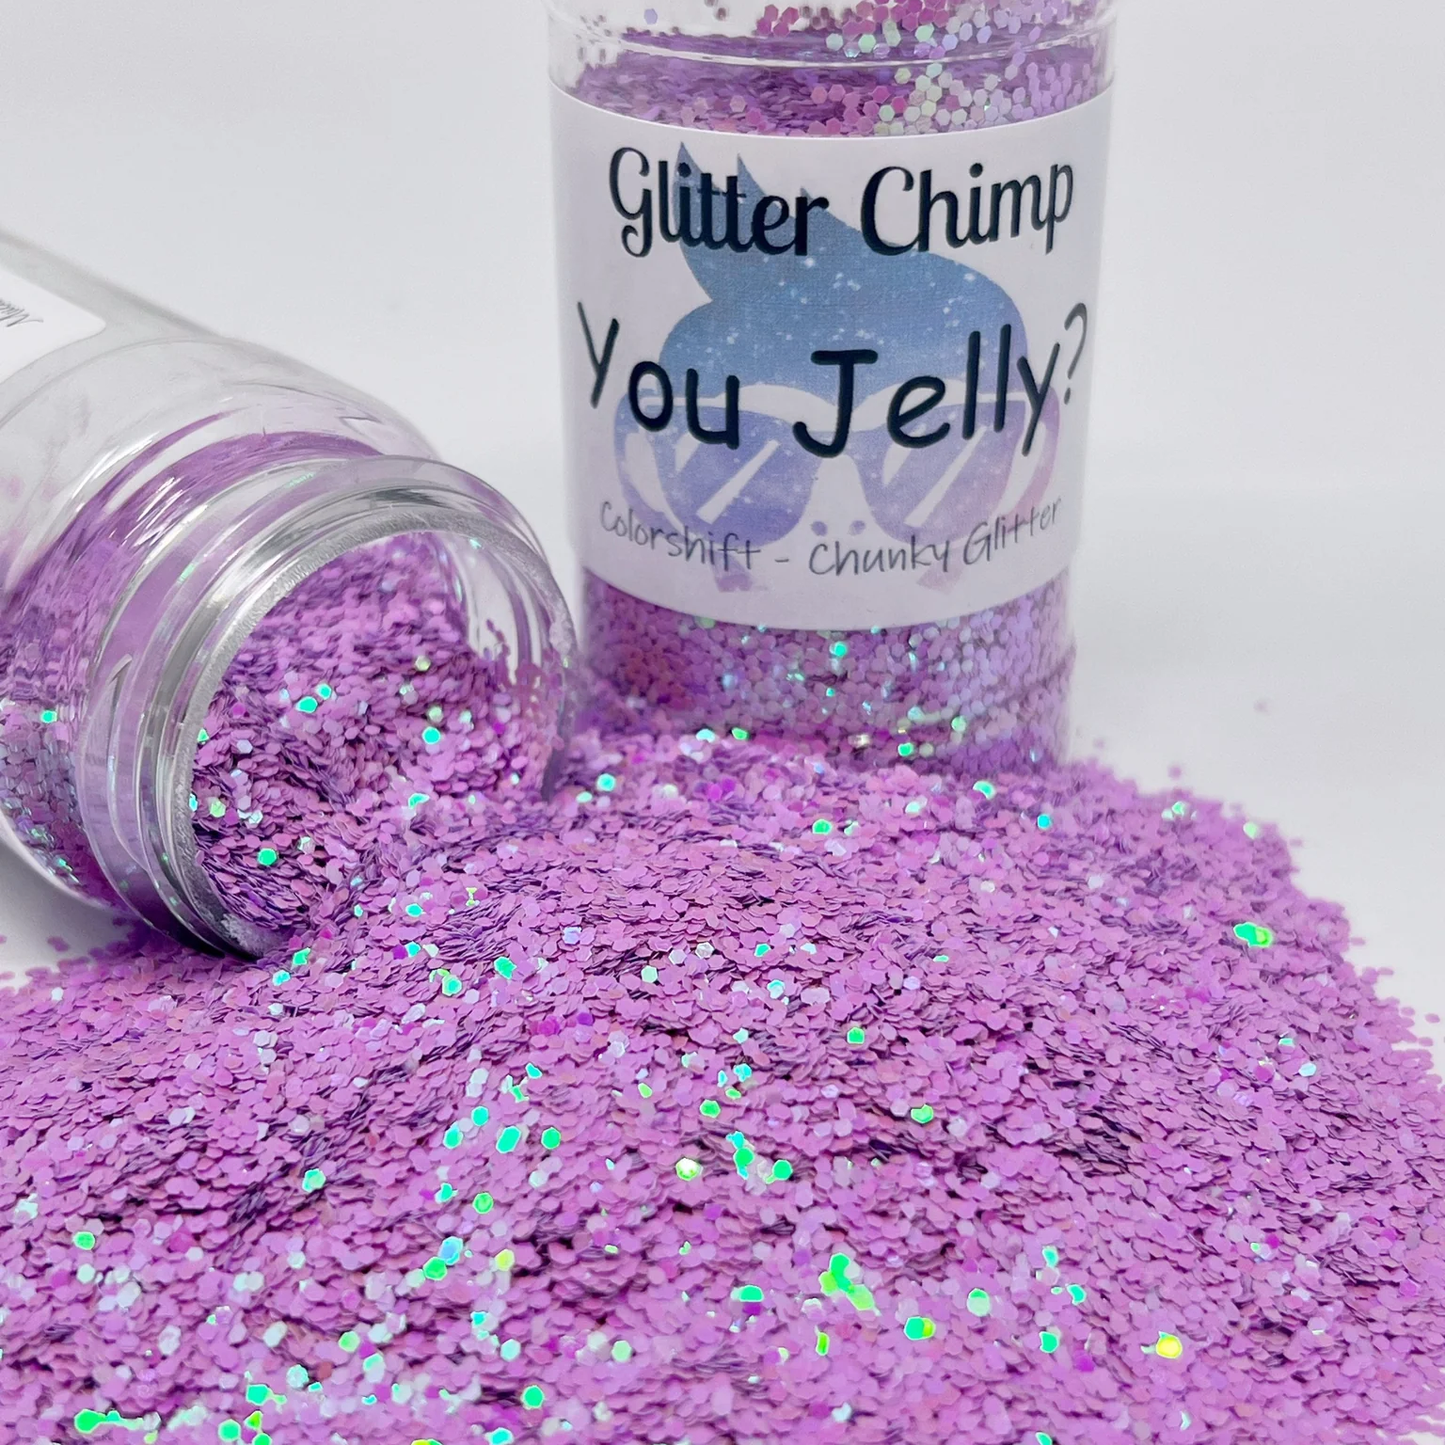 Glitter Chimp You Jelly? - Chunky Color Shifting Glitter